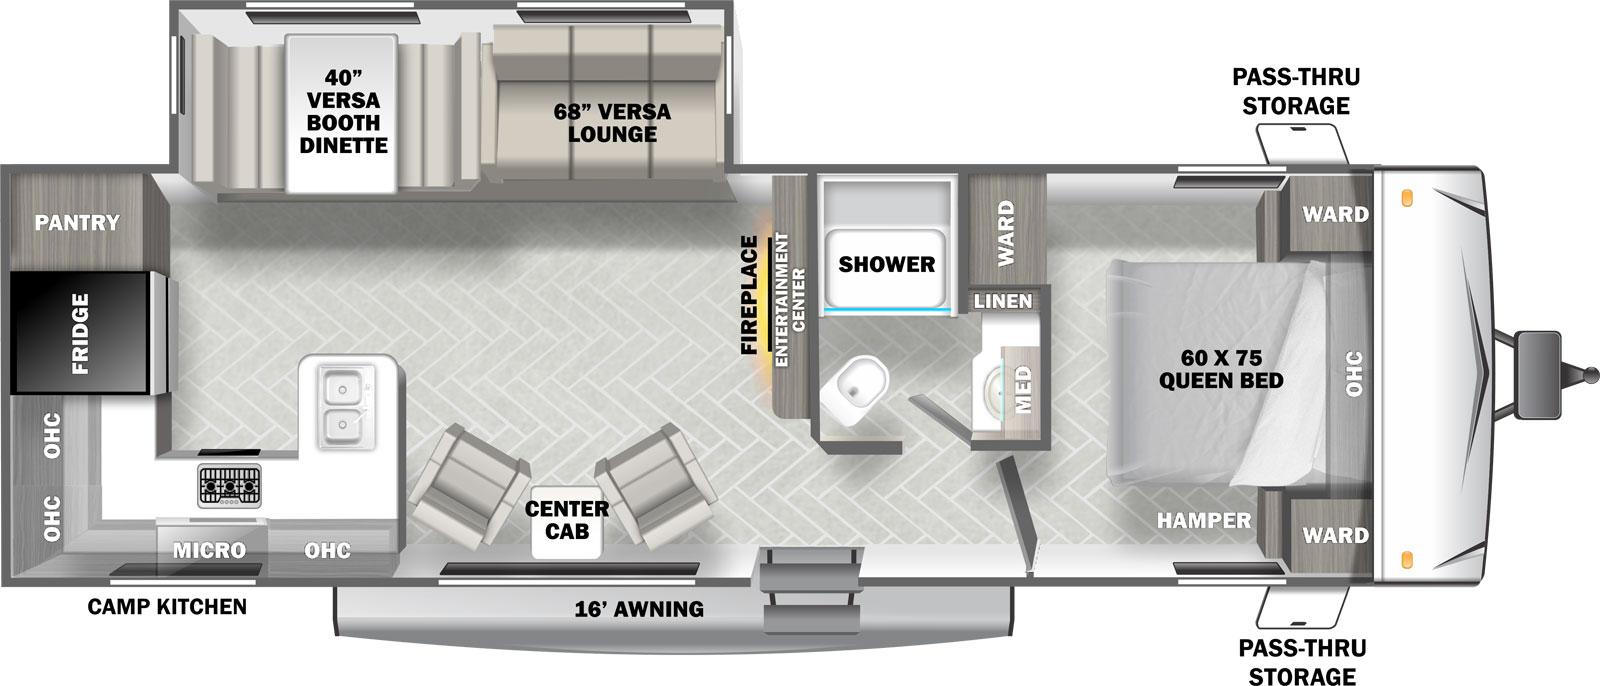 Wildwood West T27RKS floorplan. The T27RKS has one slide out and one entry door.